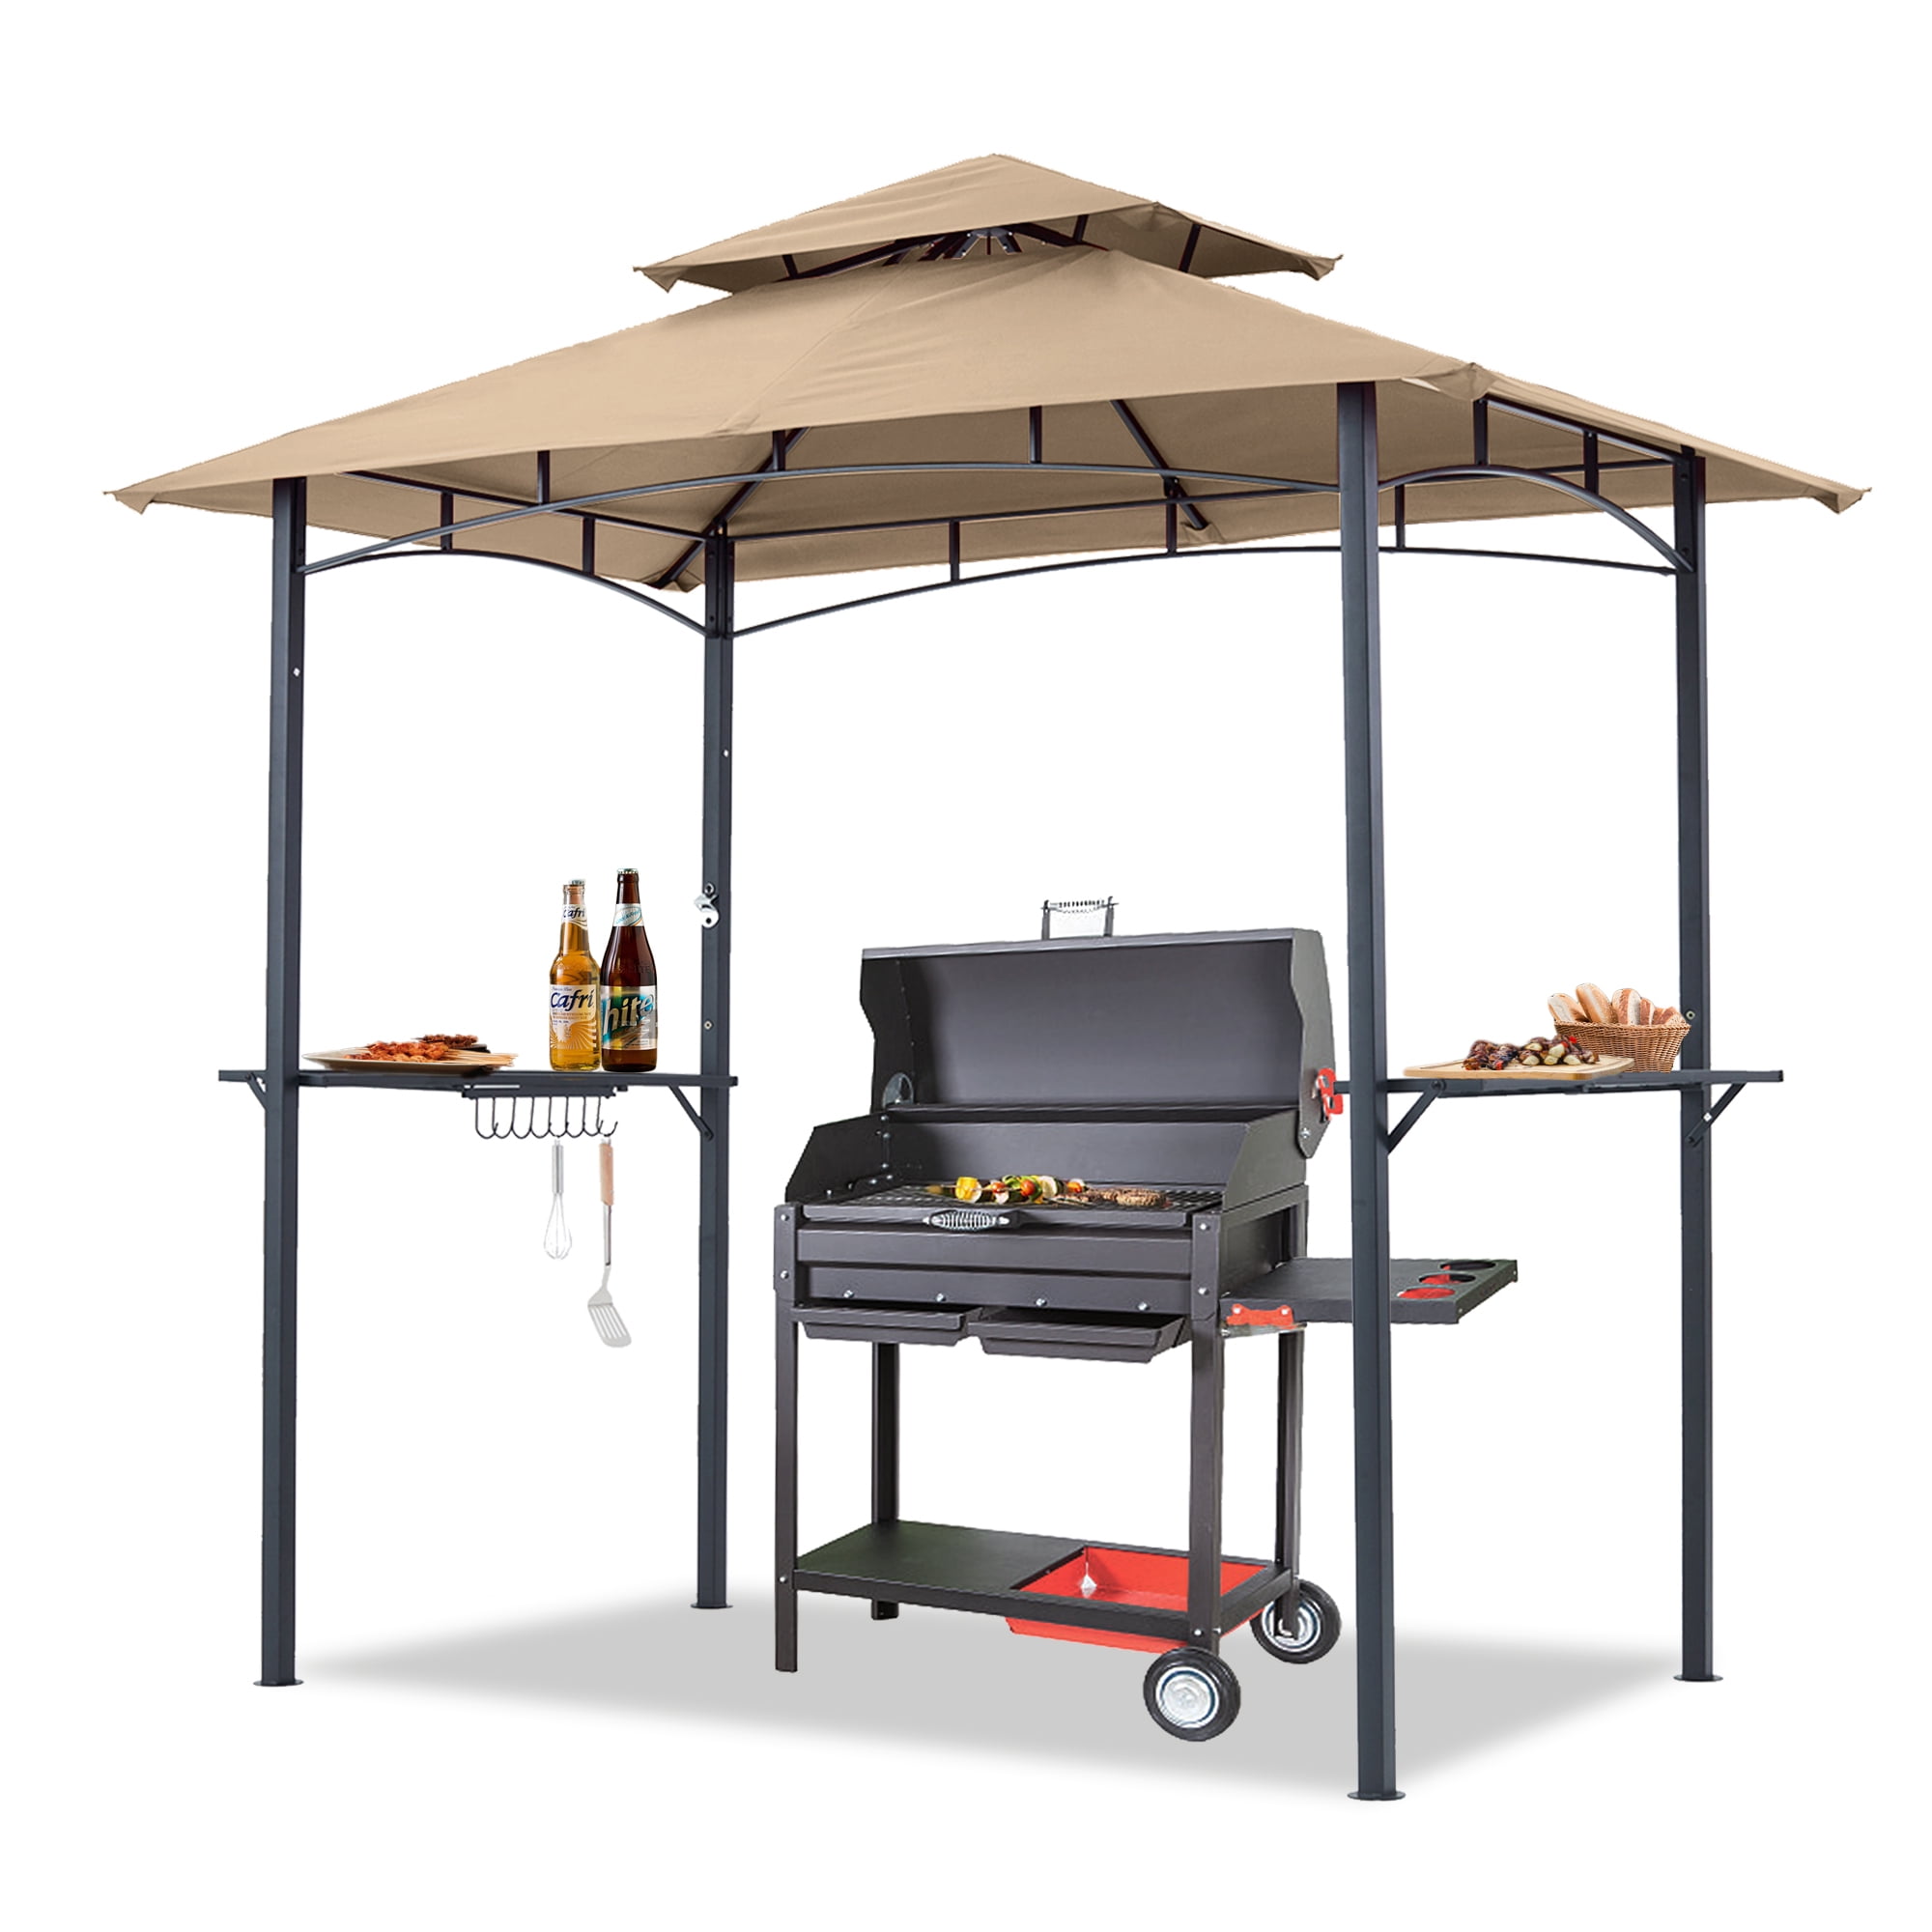 ABCCANOPY 8'x 5' Grill Gazebo Shelter, Double Tier Outdoor BBQ